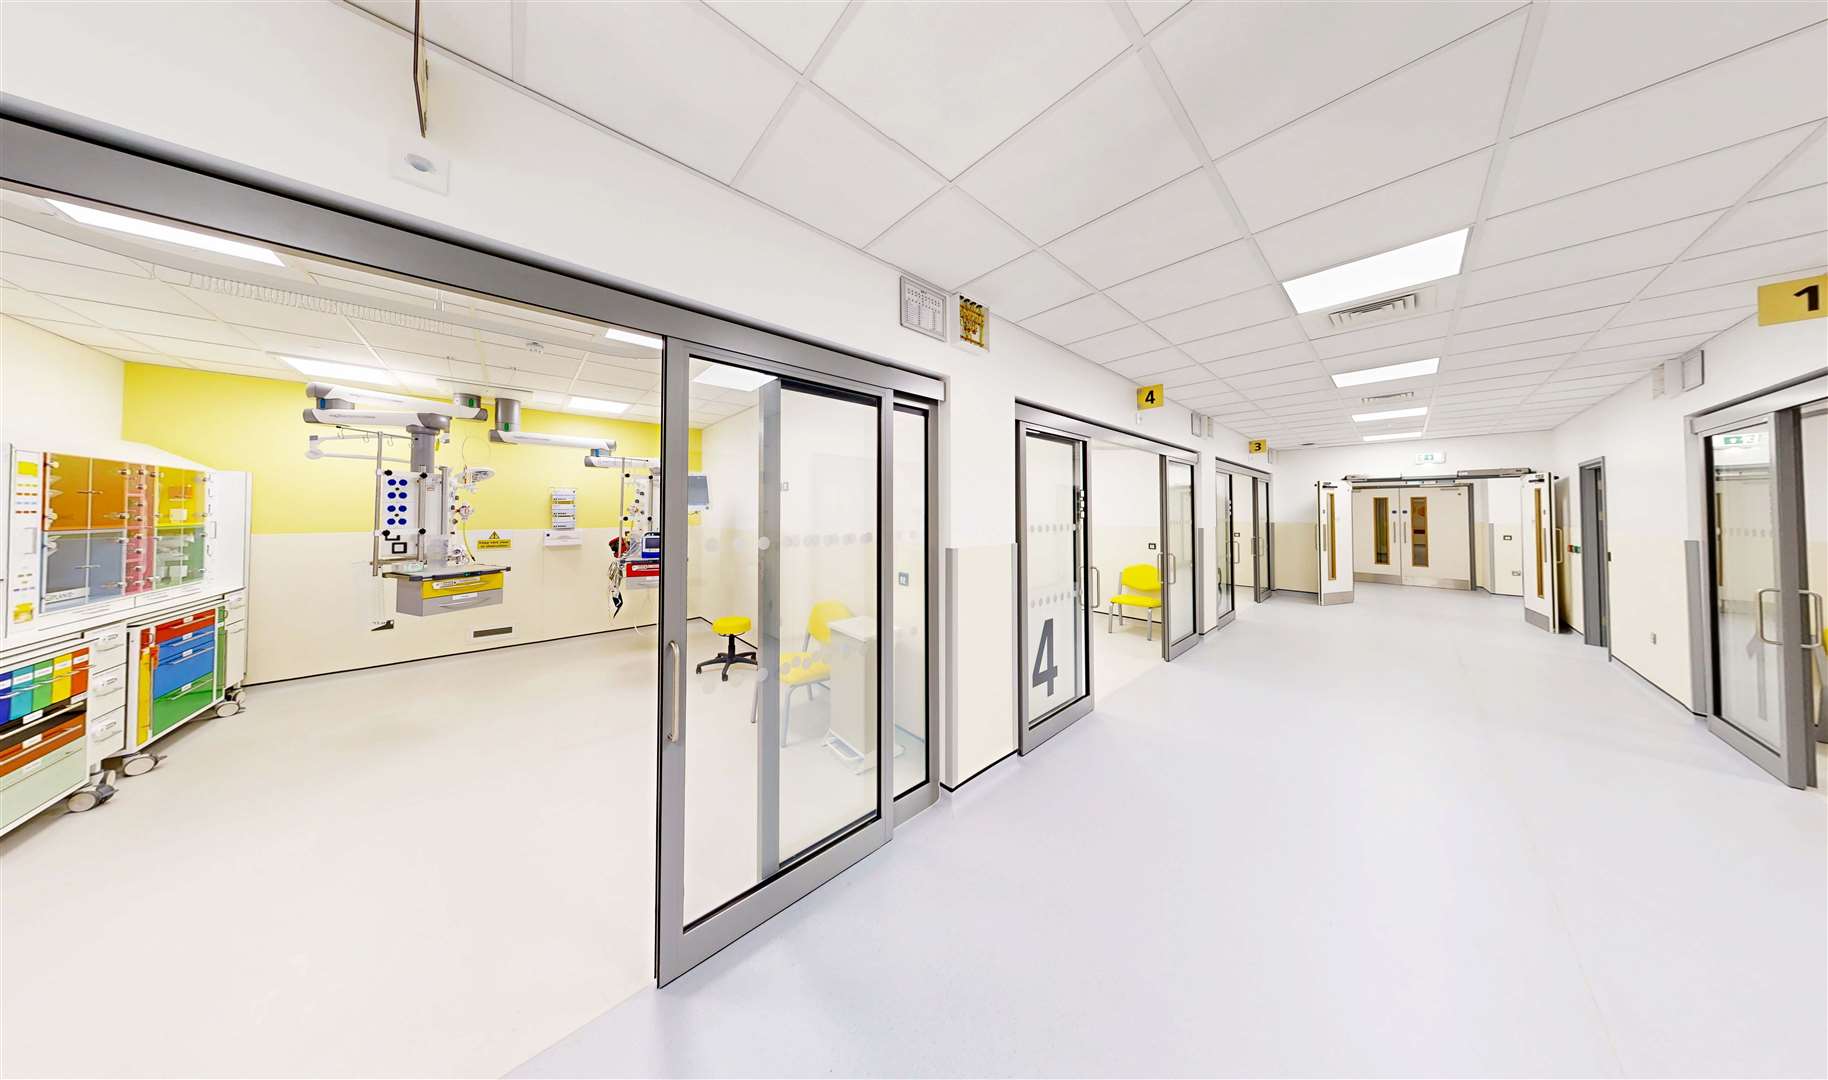 The new resuscitation bays in the revamped emergency department at QEQM hospital in Margate. Picture: East Kent Hospitals NHS Trust